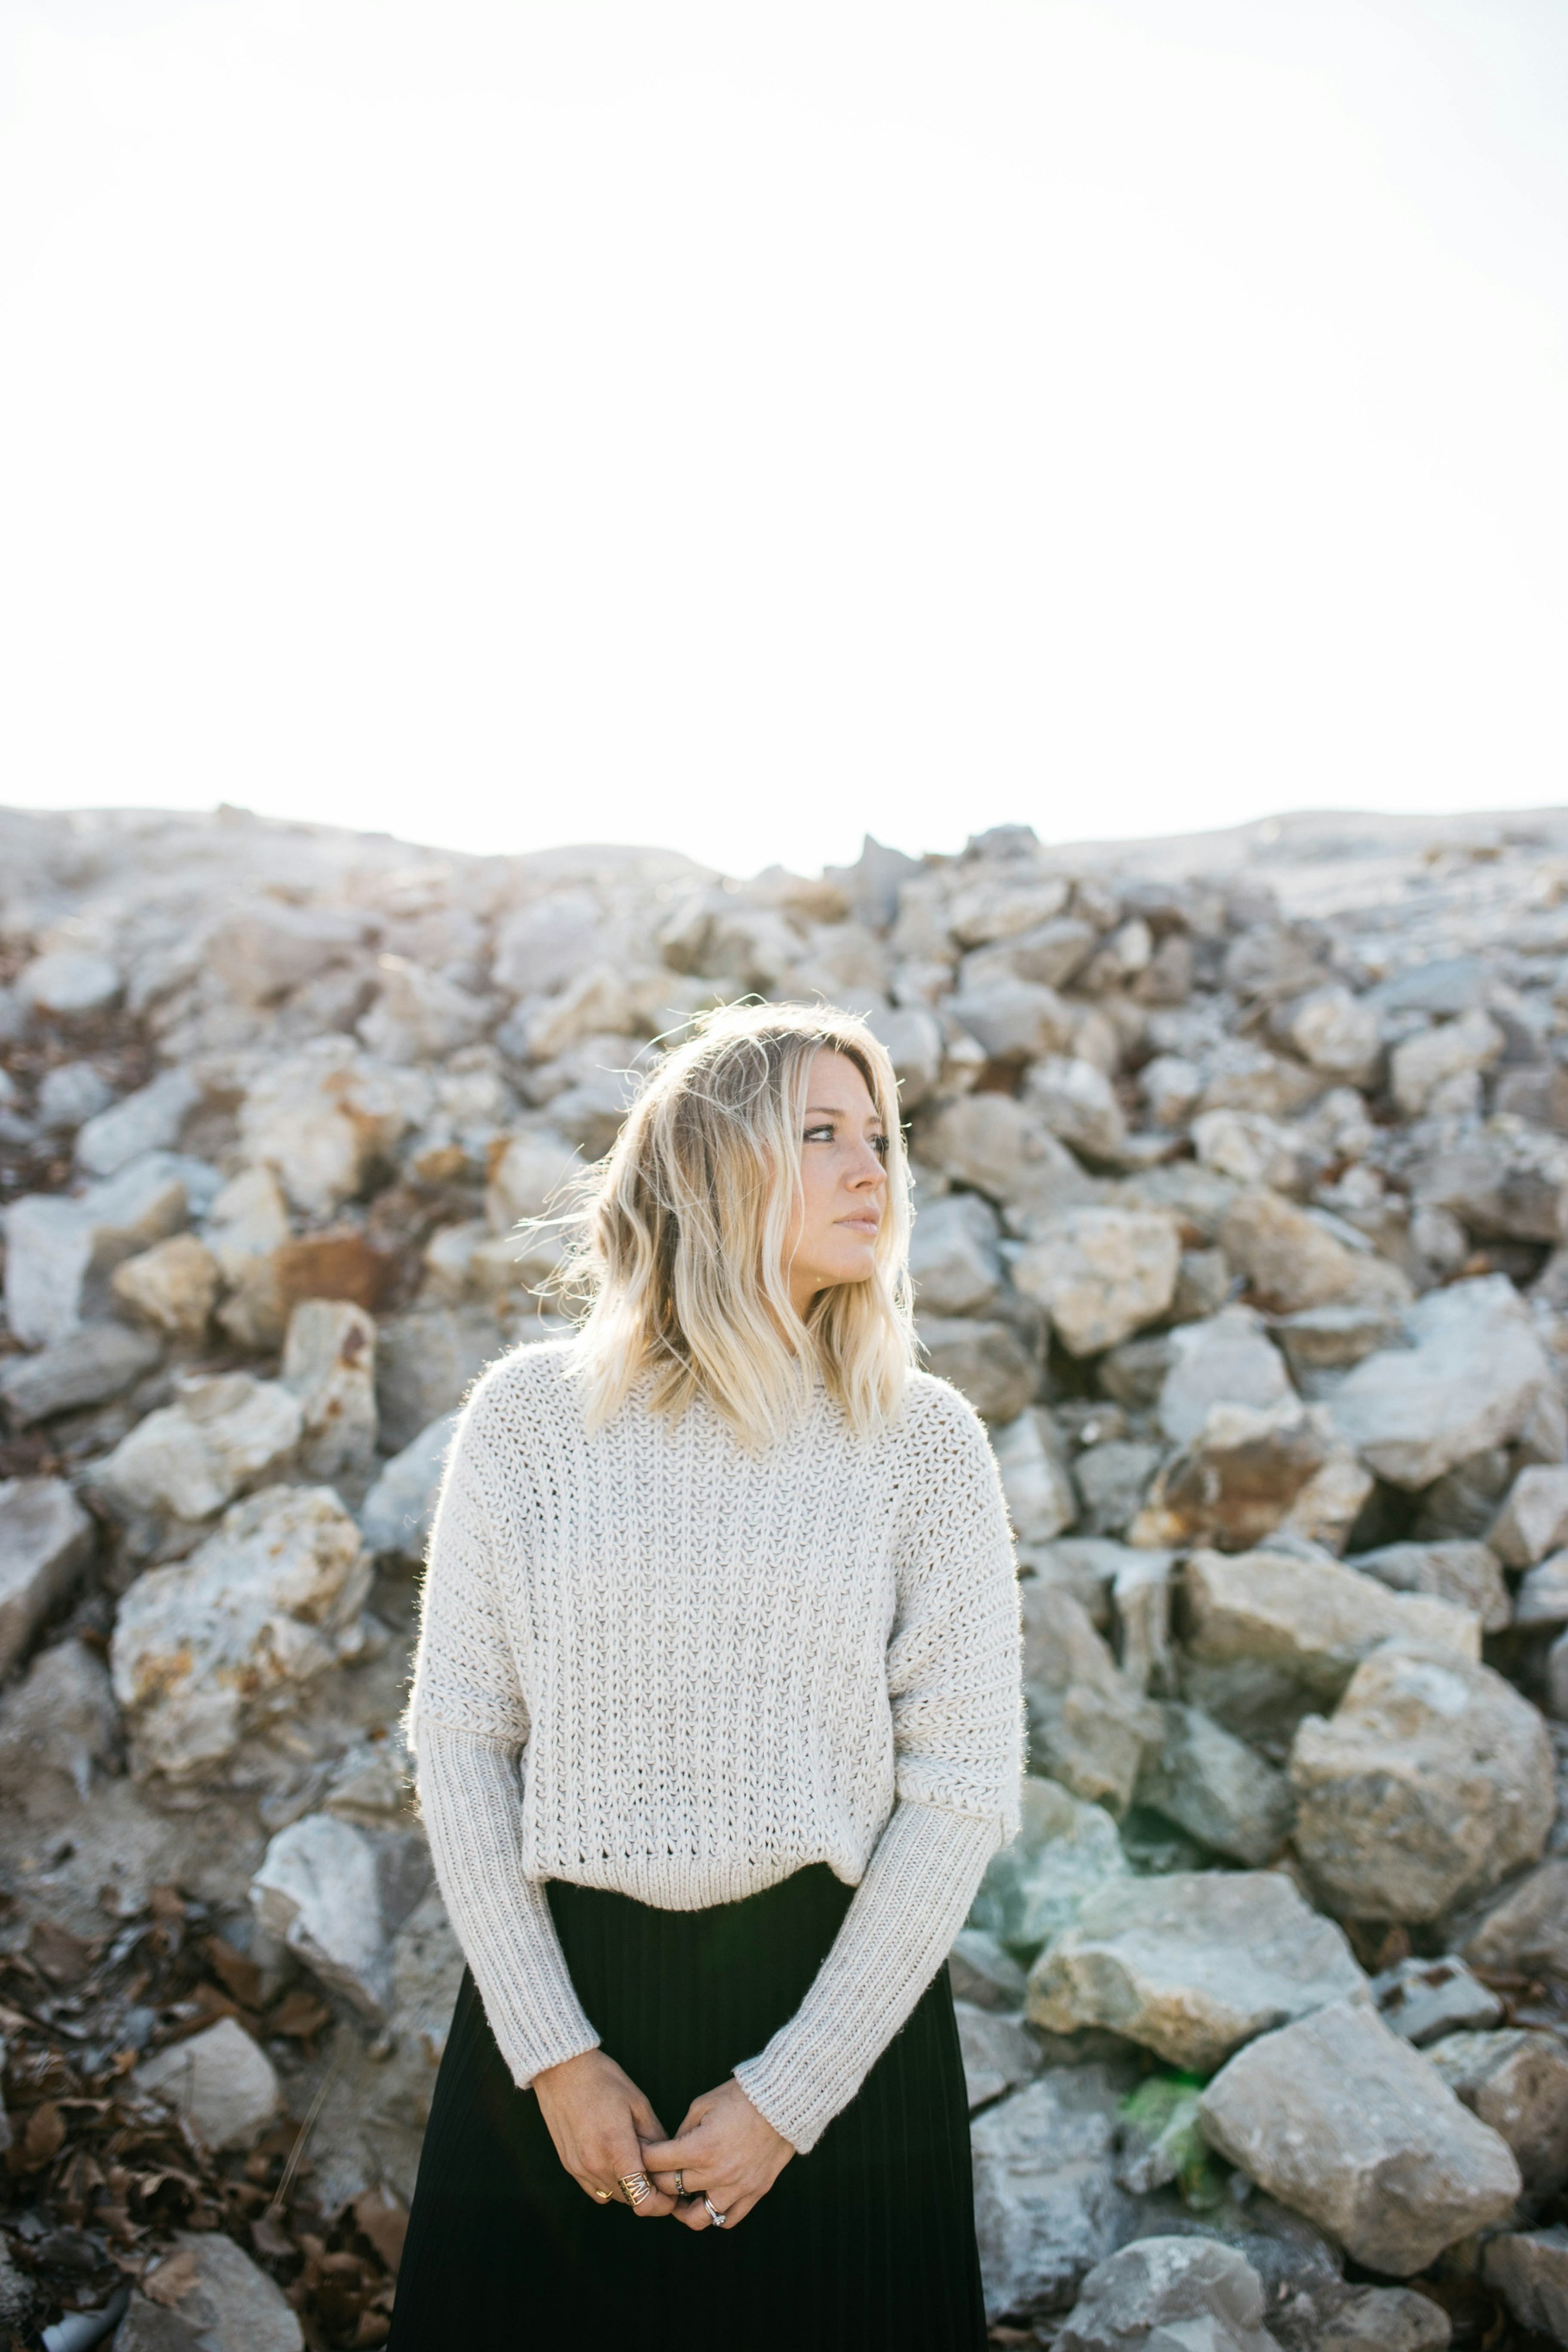 A blonde woman standing near a pile of stones | Source: Unsplash